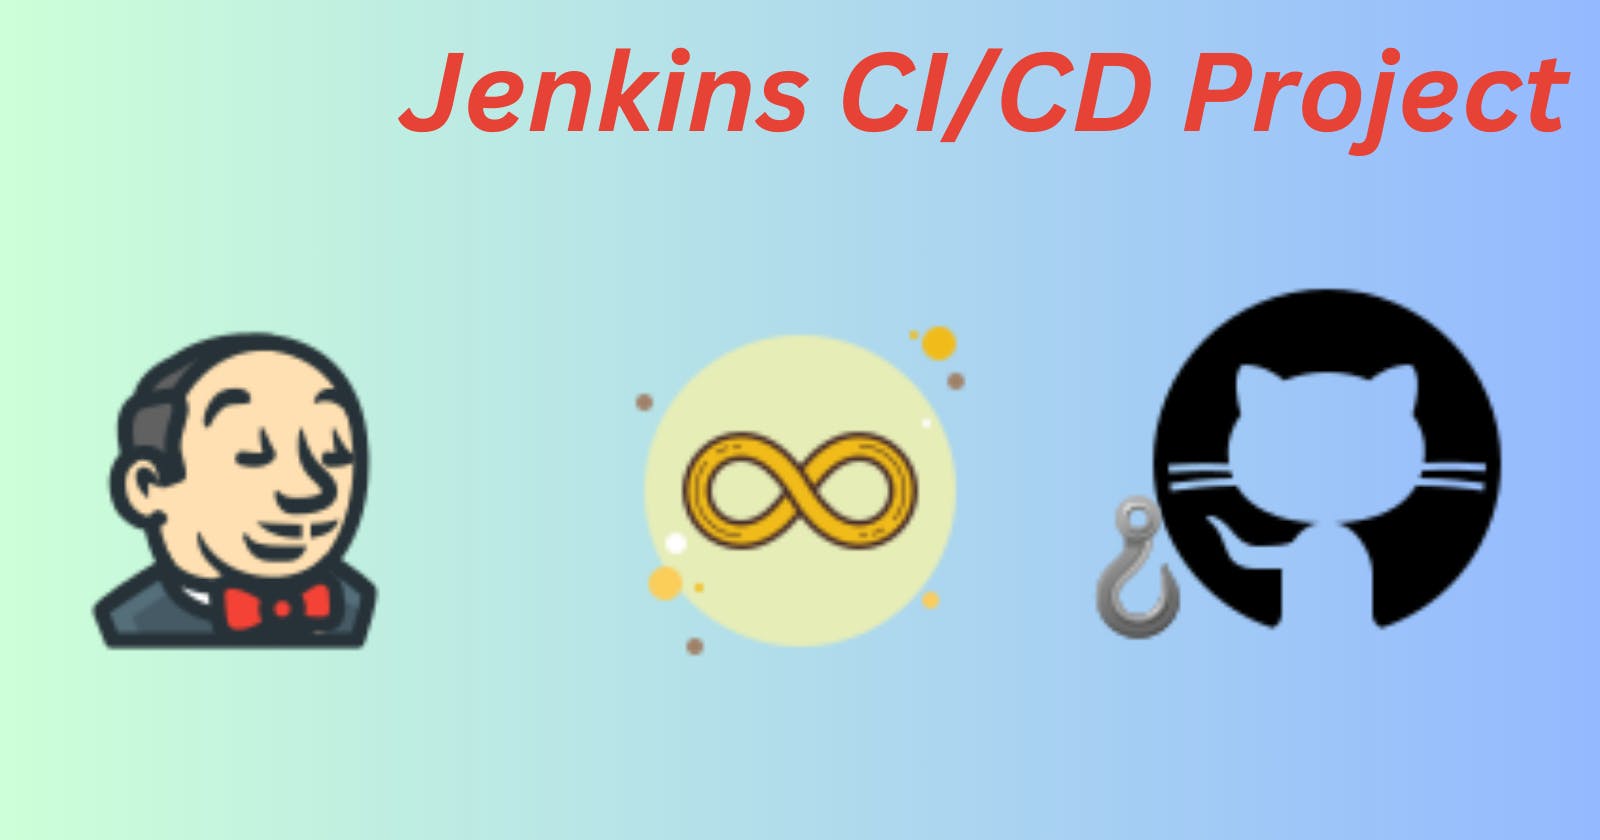 ⚙Day 24- Complete Jenkins CI/CD Project